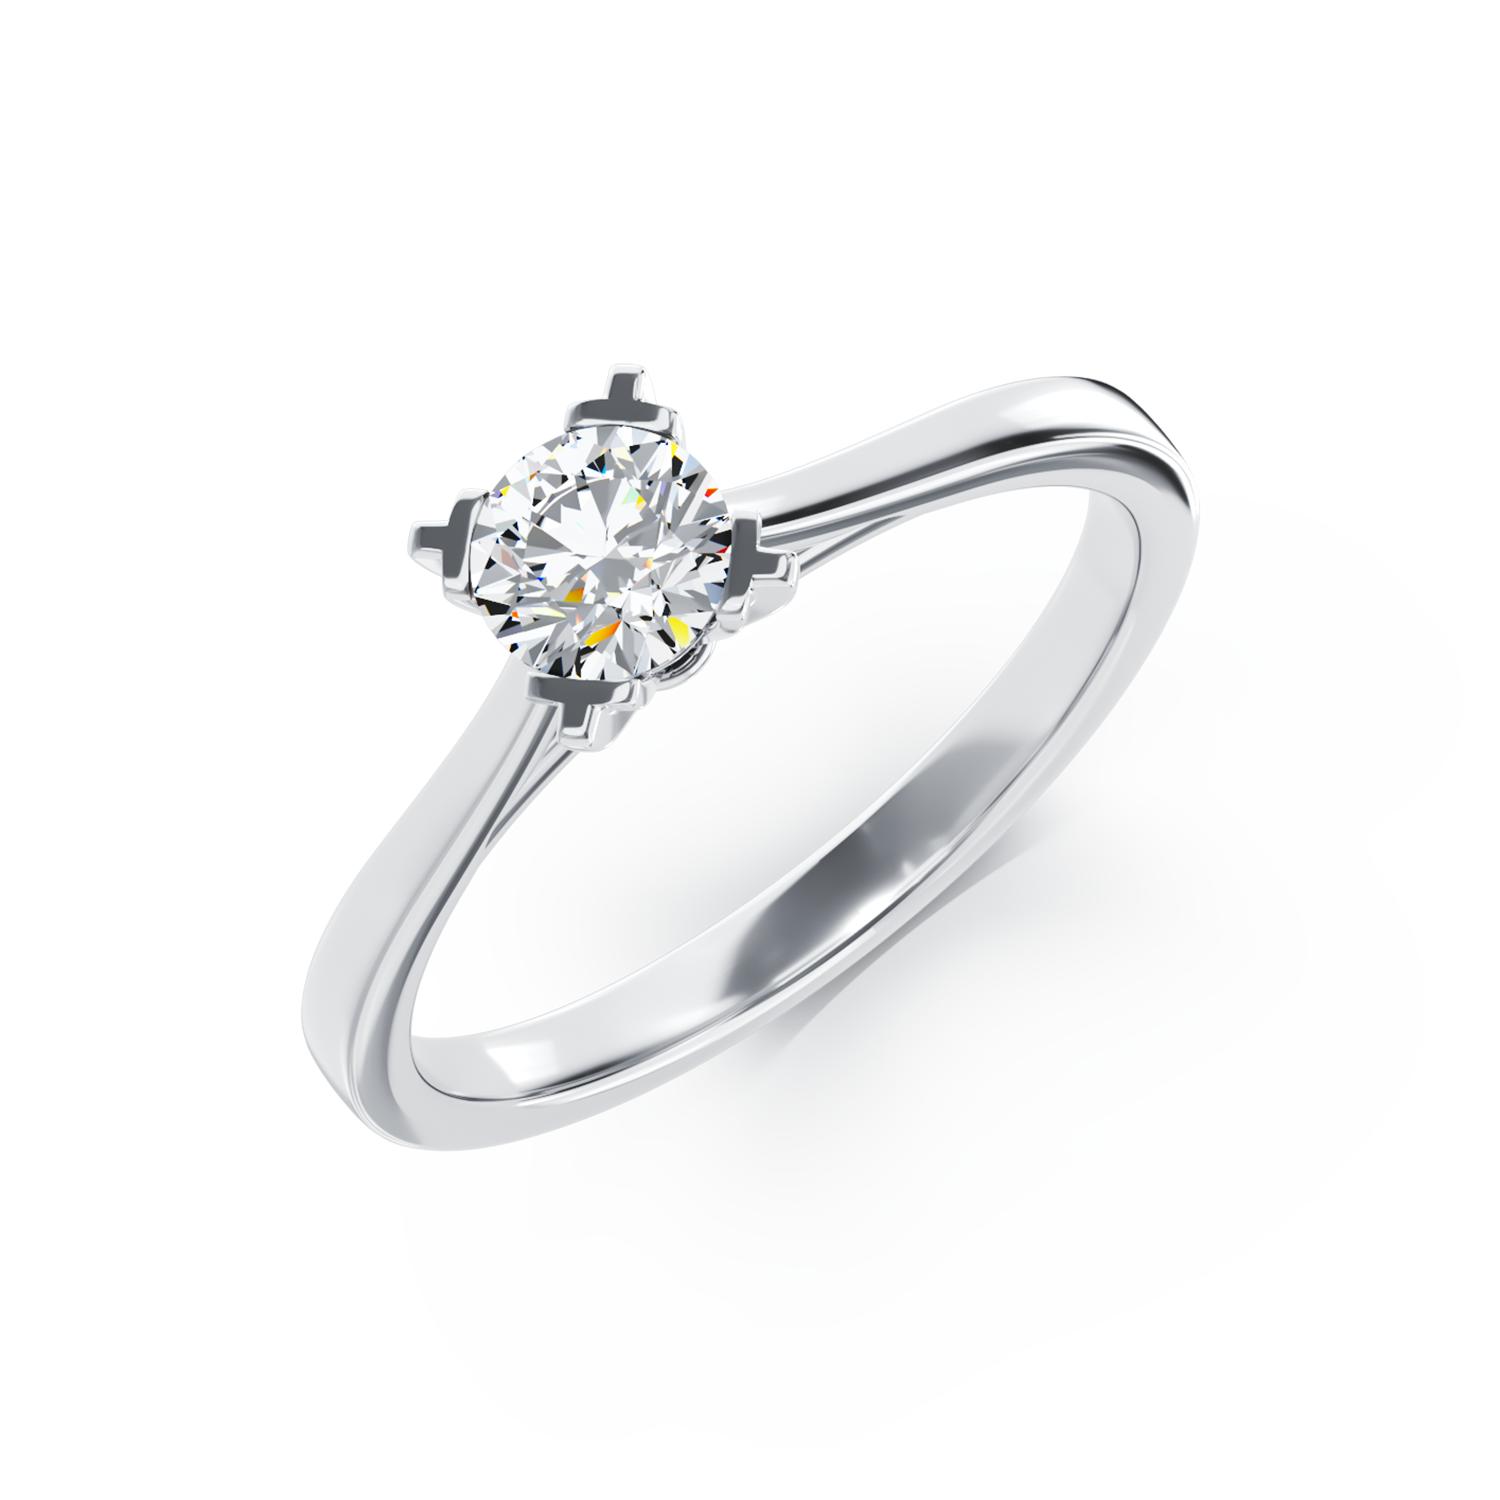 18K white gold engagement ring with a 0.16ct solitaire diamond